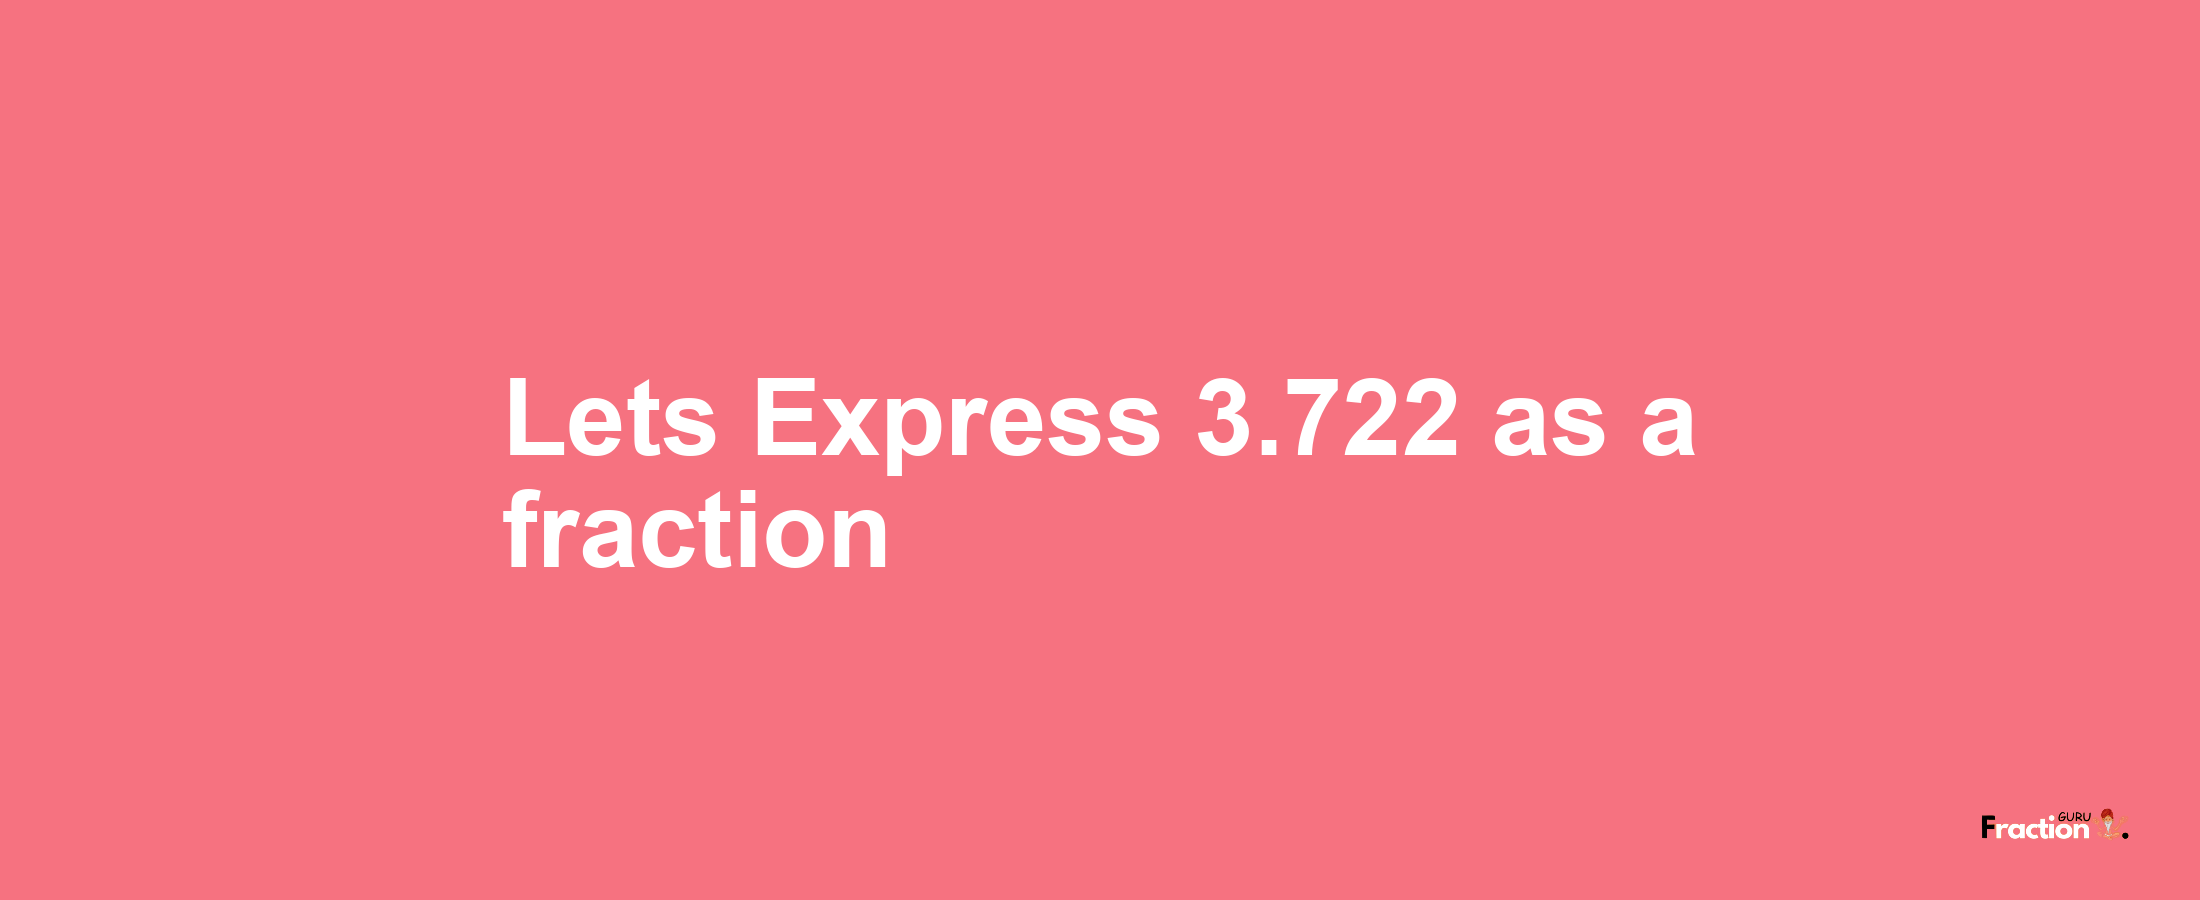 Lets Express 3.722 as afraction